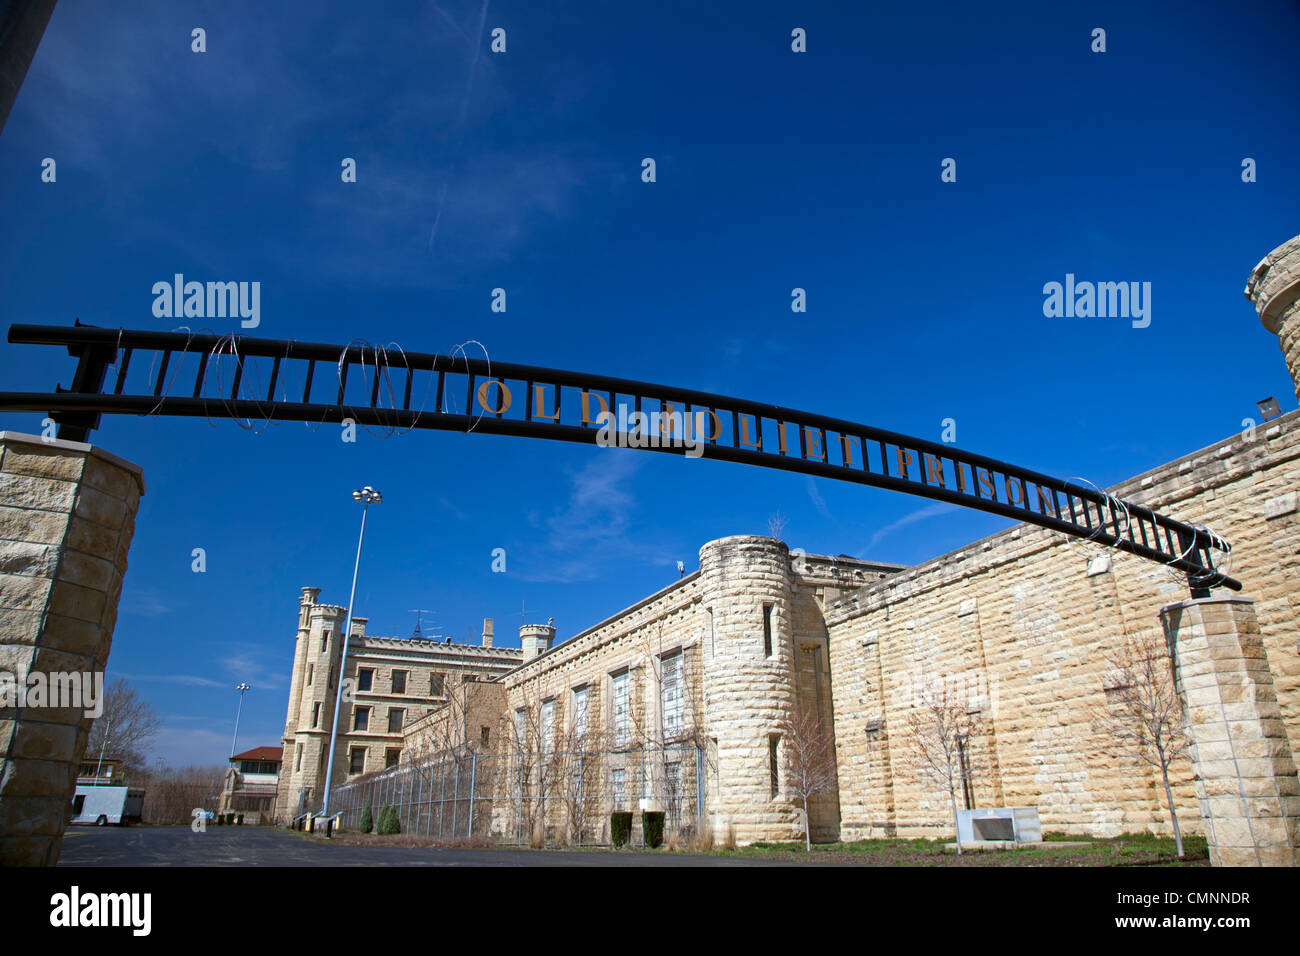 Joliet, Illinois - The Joliet Correctional Center, a prison which opened in 1858 and closed in 2002. Stock Photo